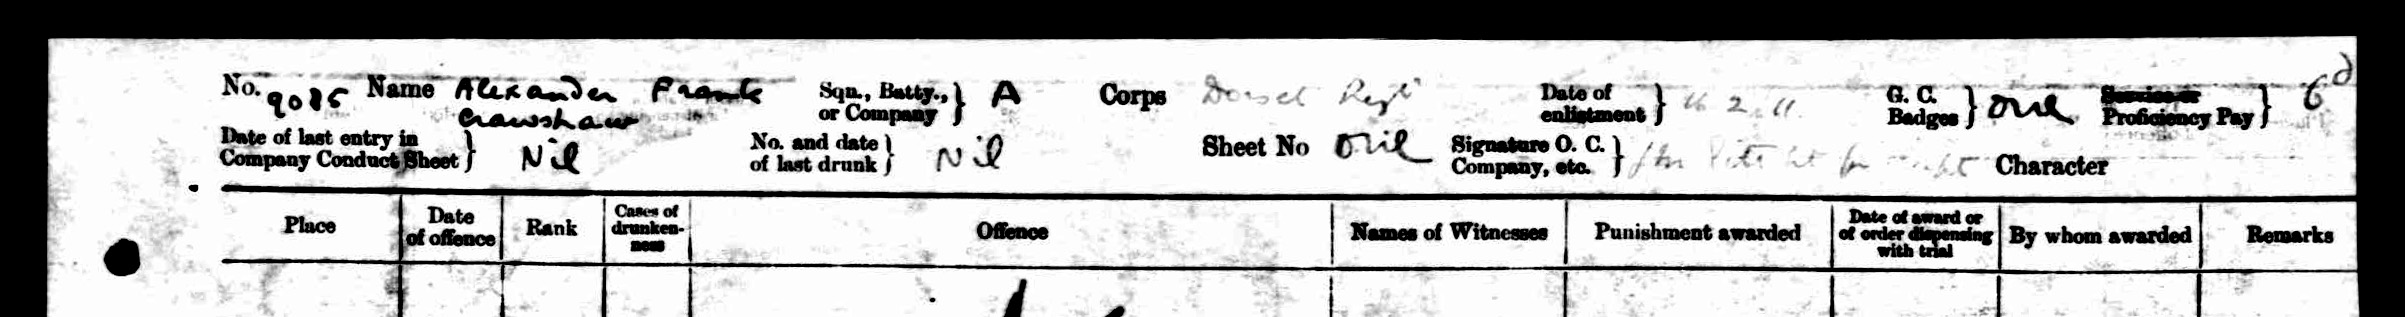 Image showing Frank's conduct sheet